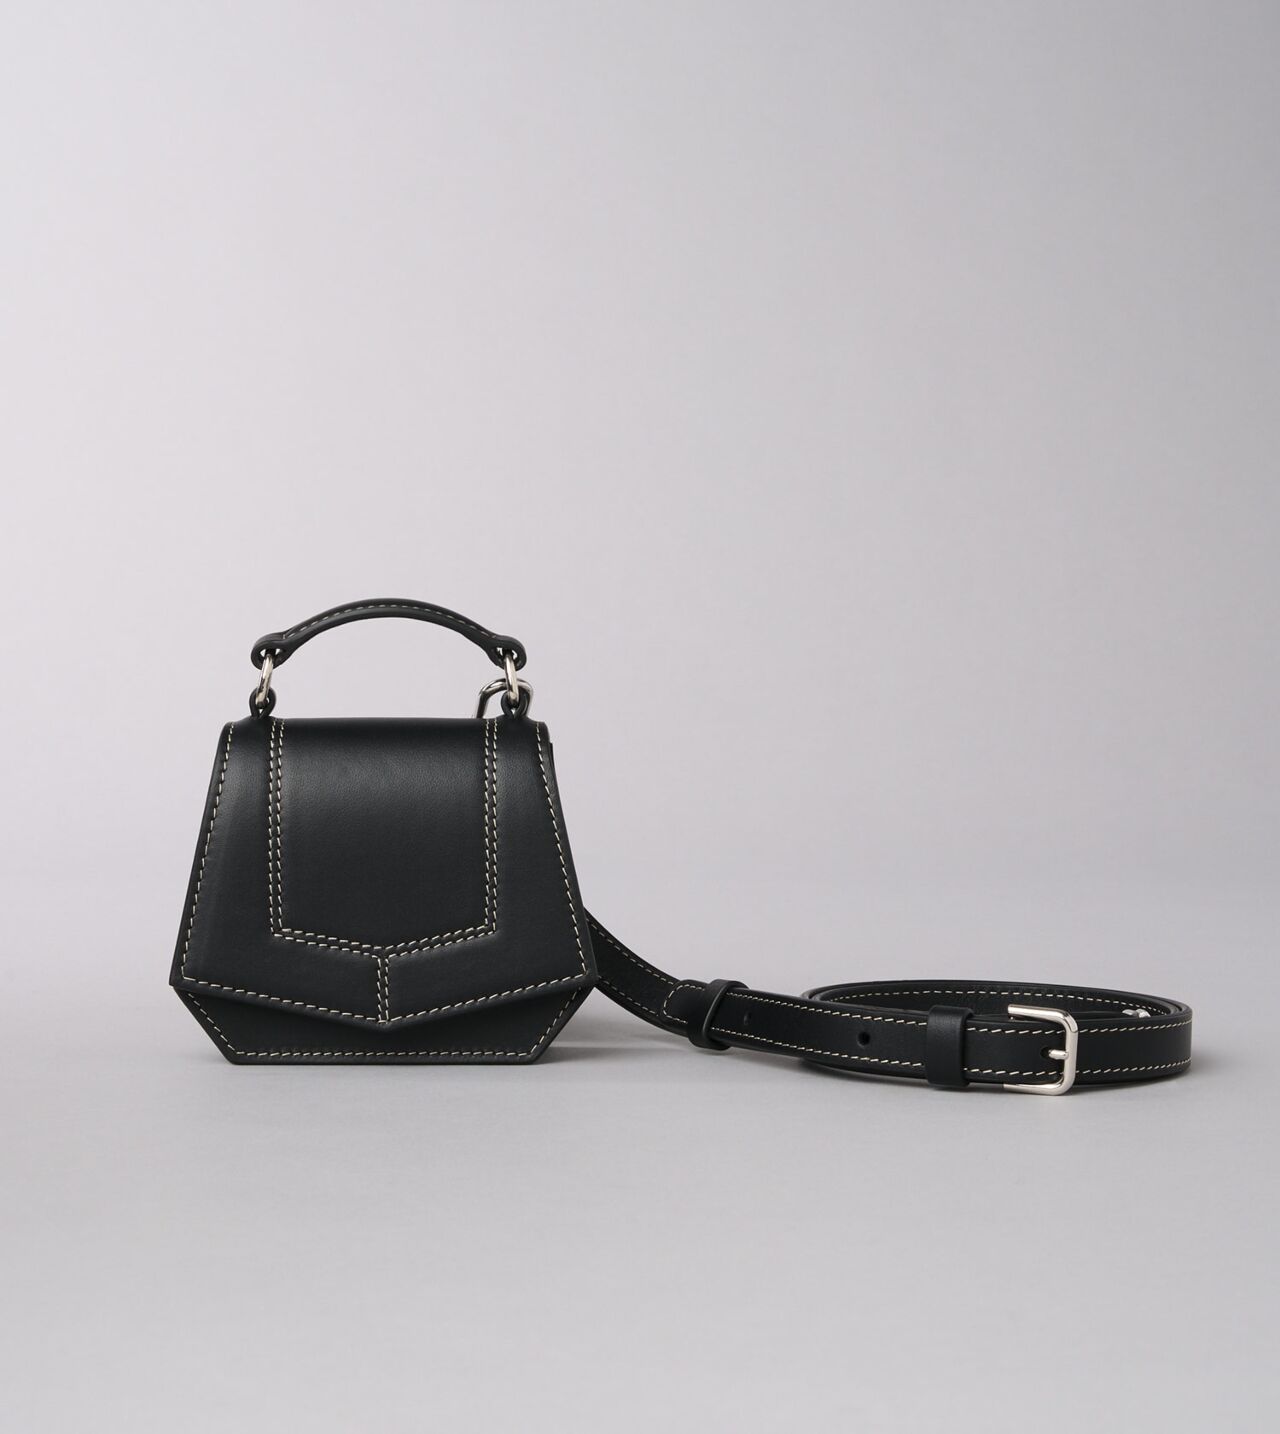 Blueprint Micro Bag in Black Leather